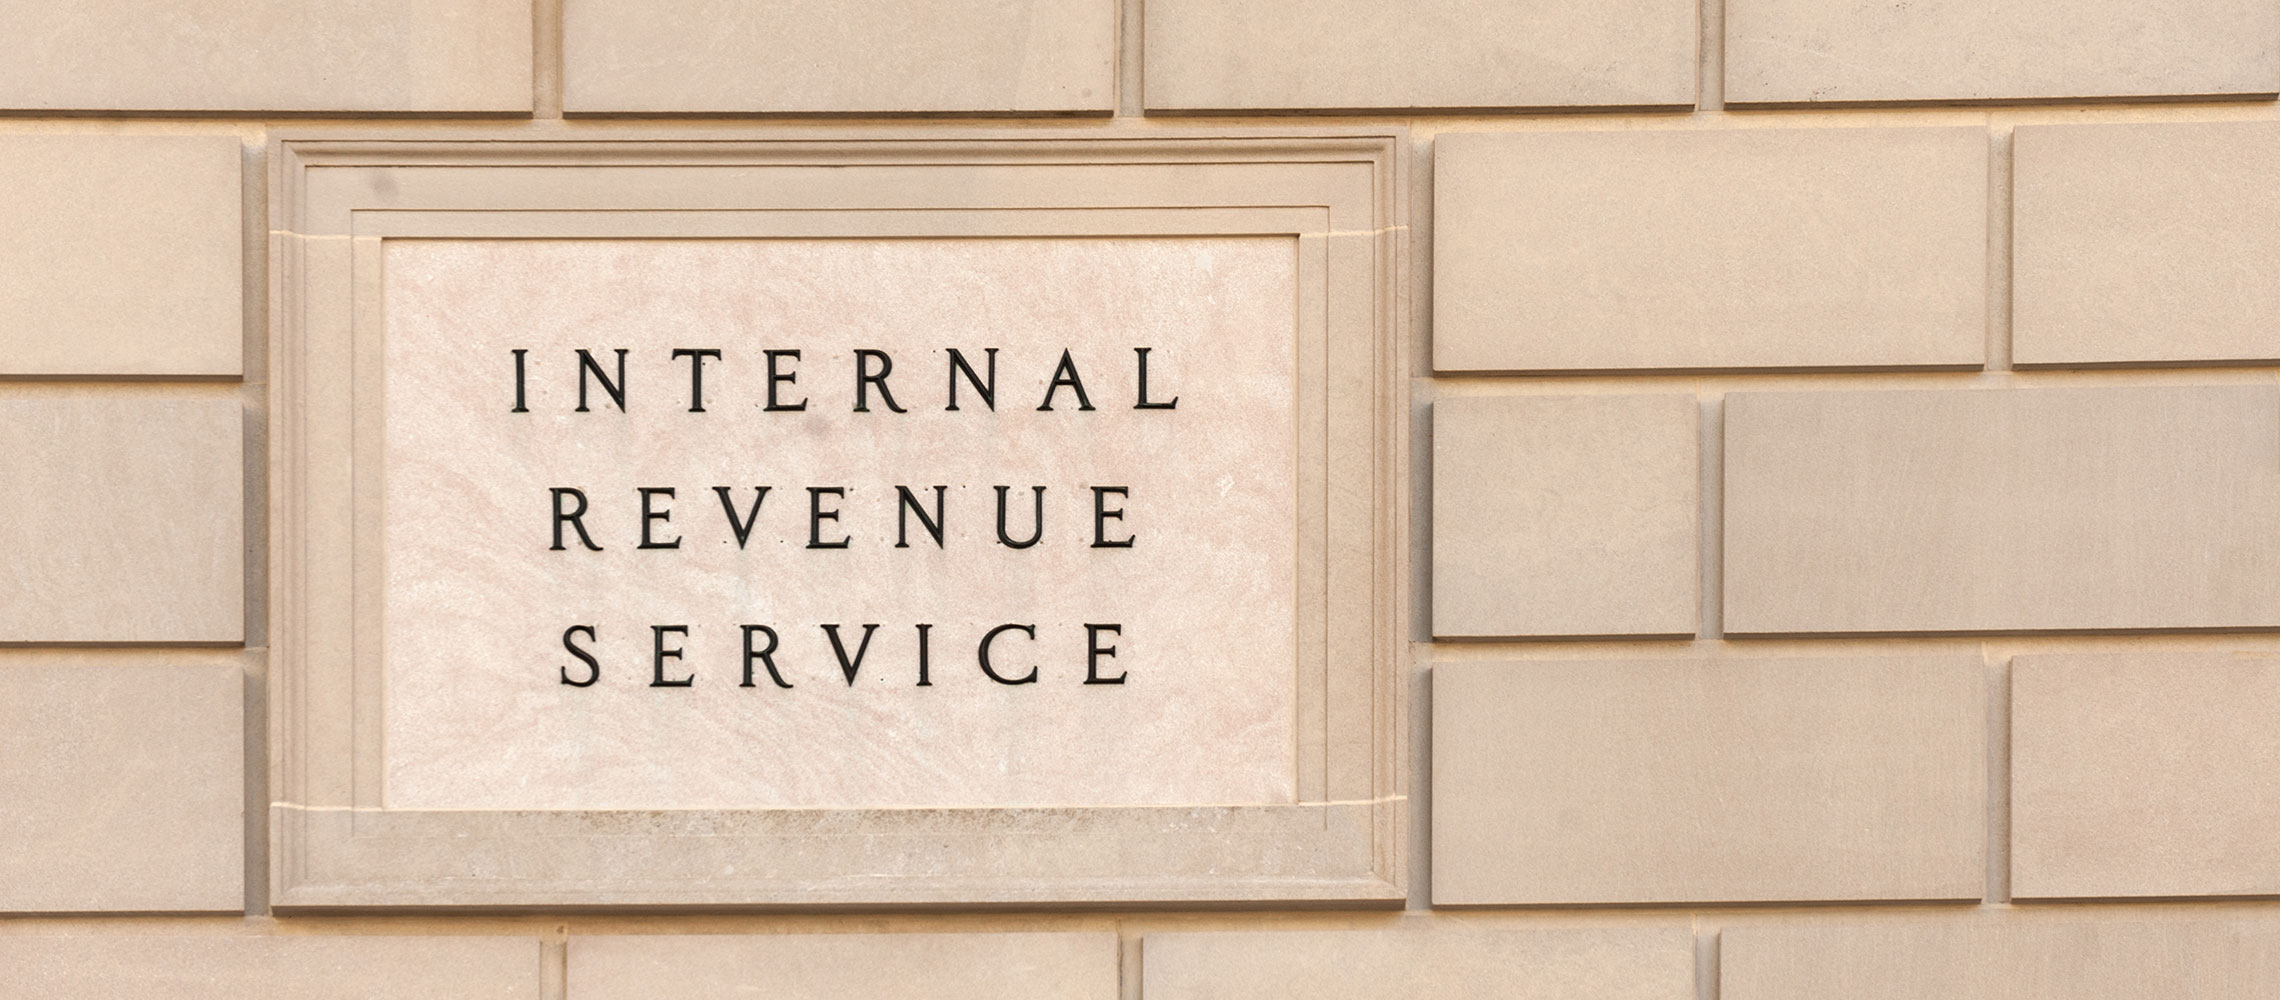 Photo of IRS Building Sign